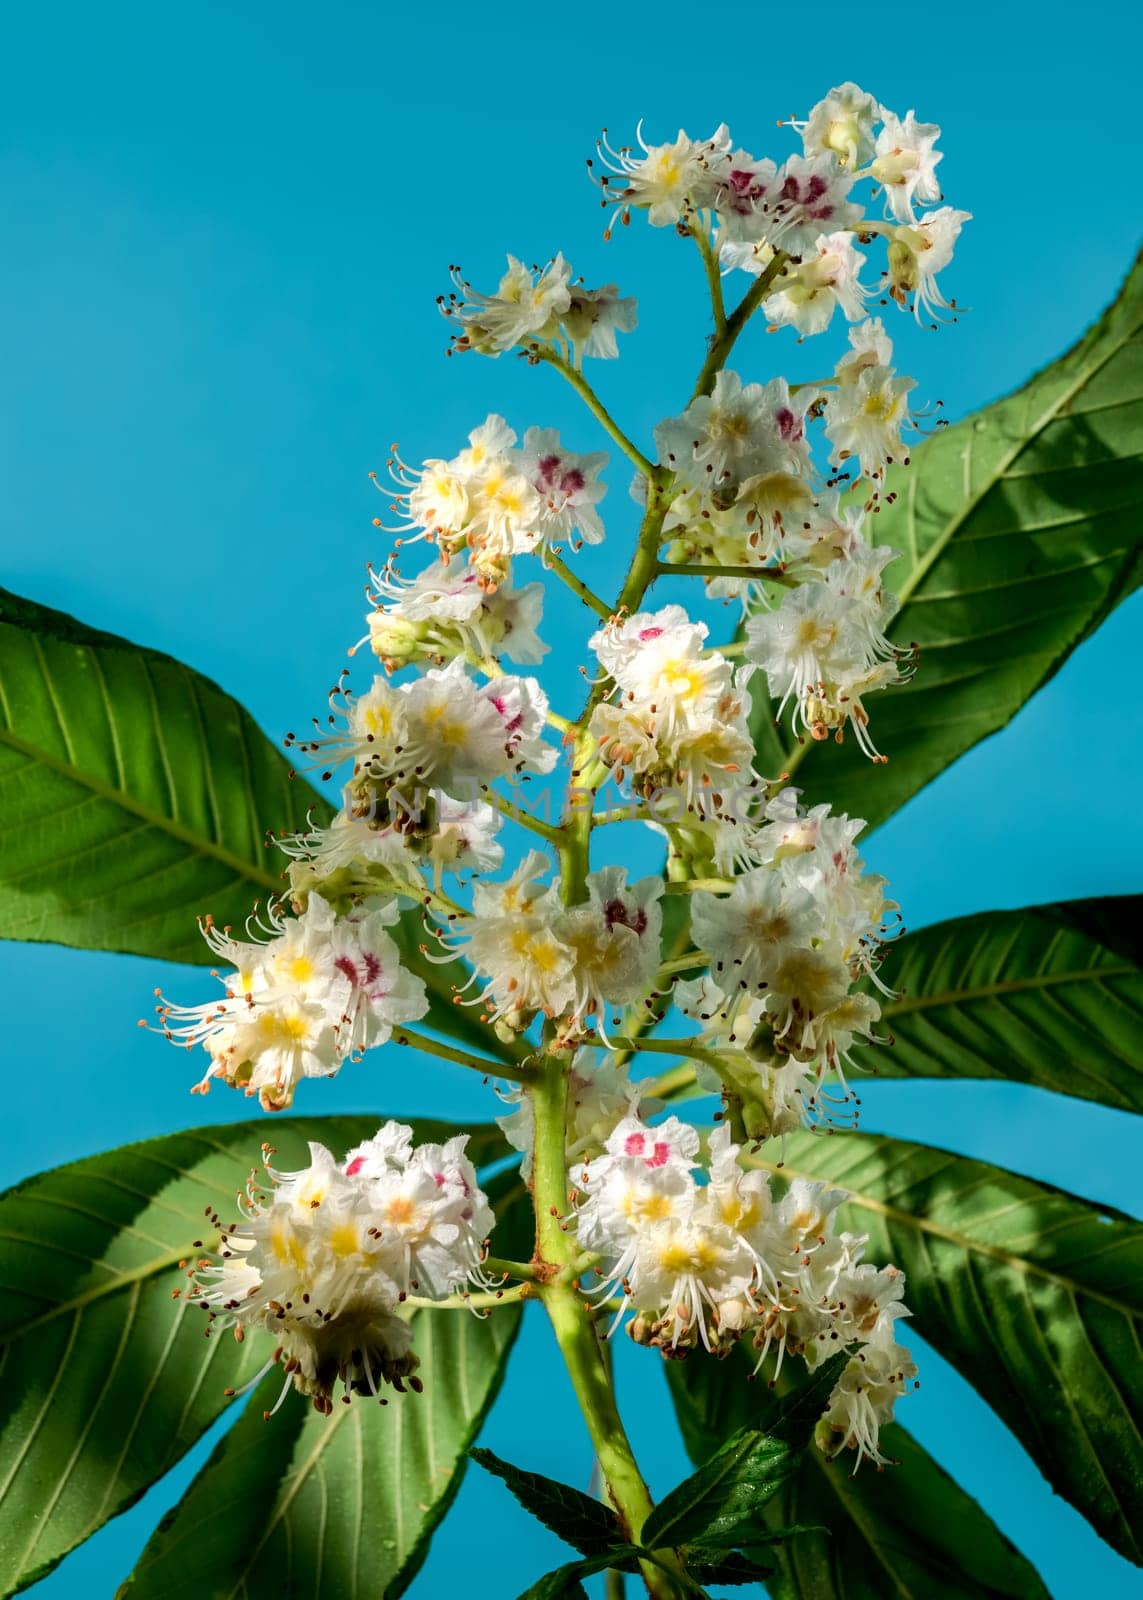 Blooming chestnut tree flowers on a blue background by Multipedia